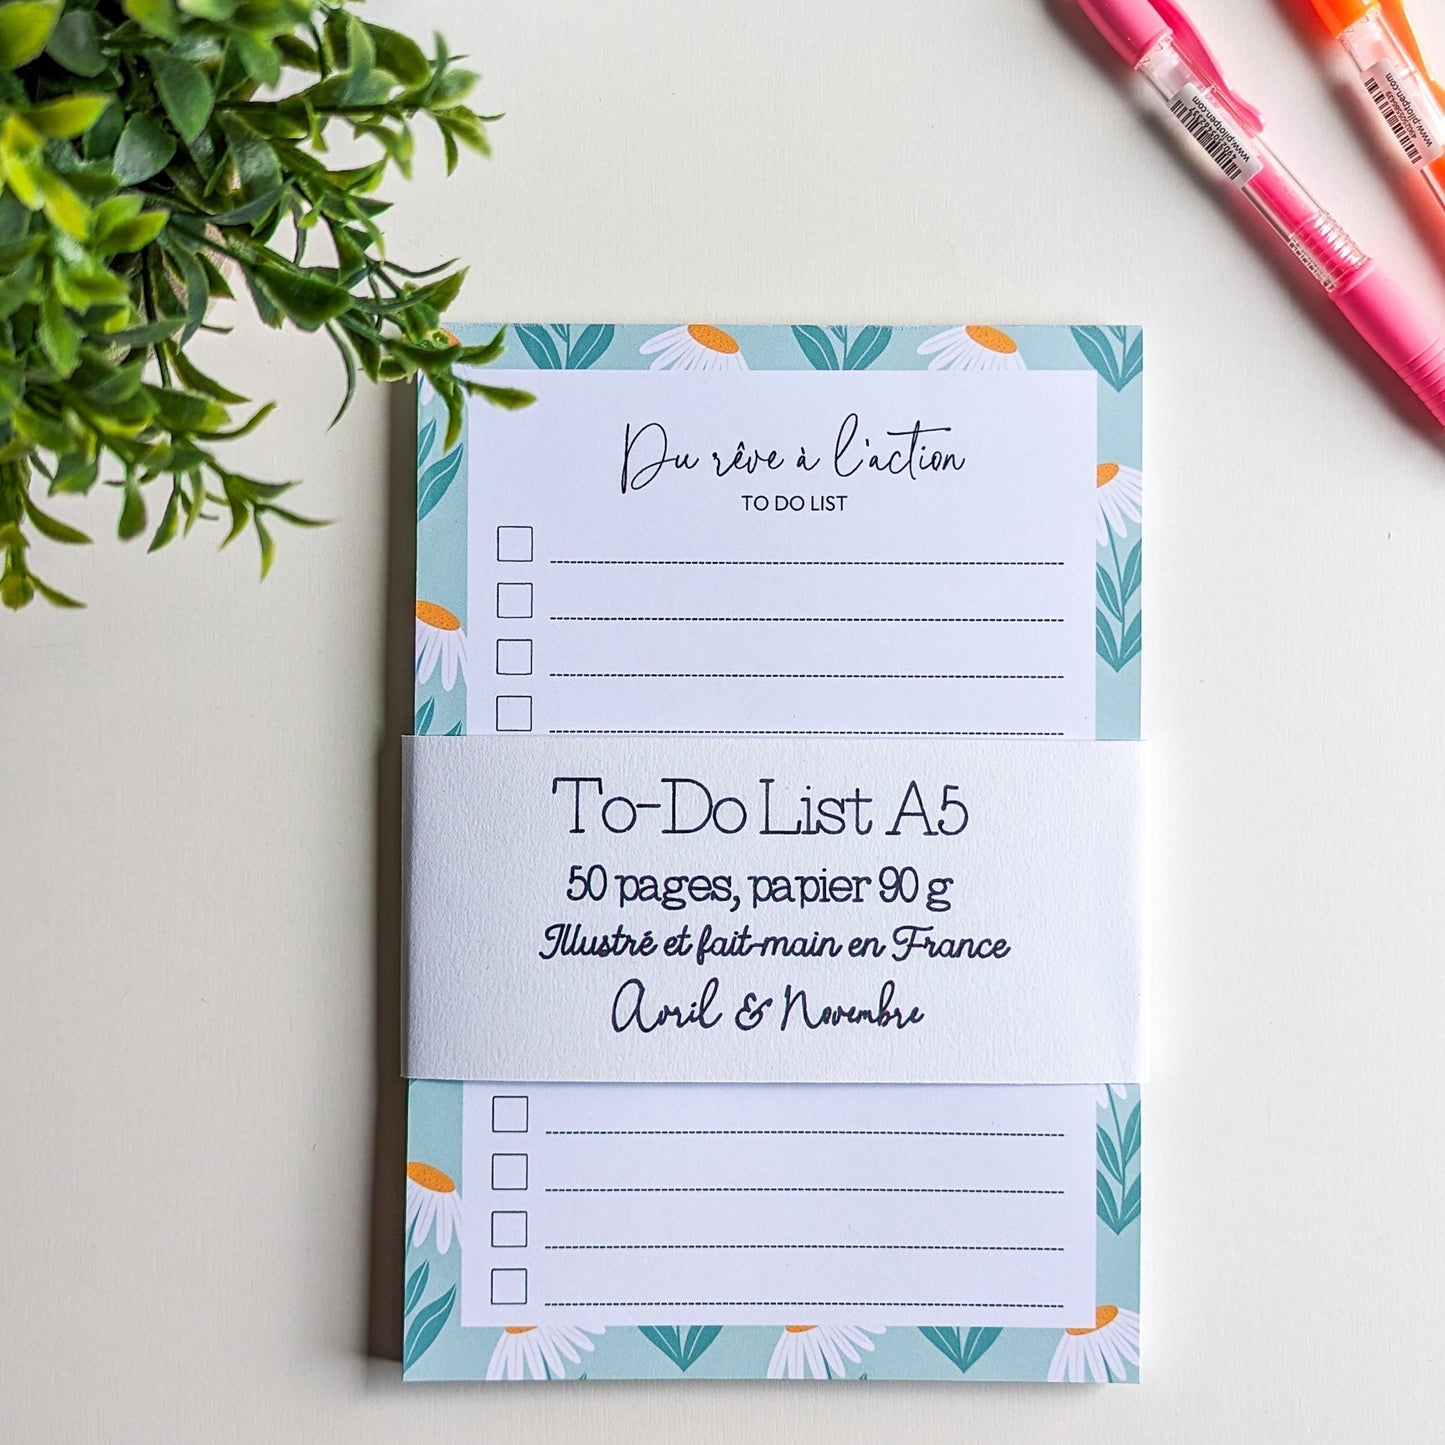 To-Do List A5 Marguerites